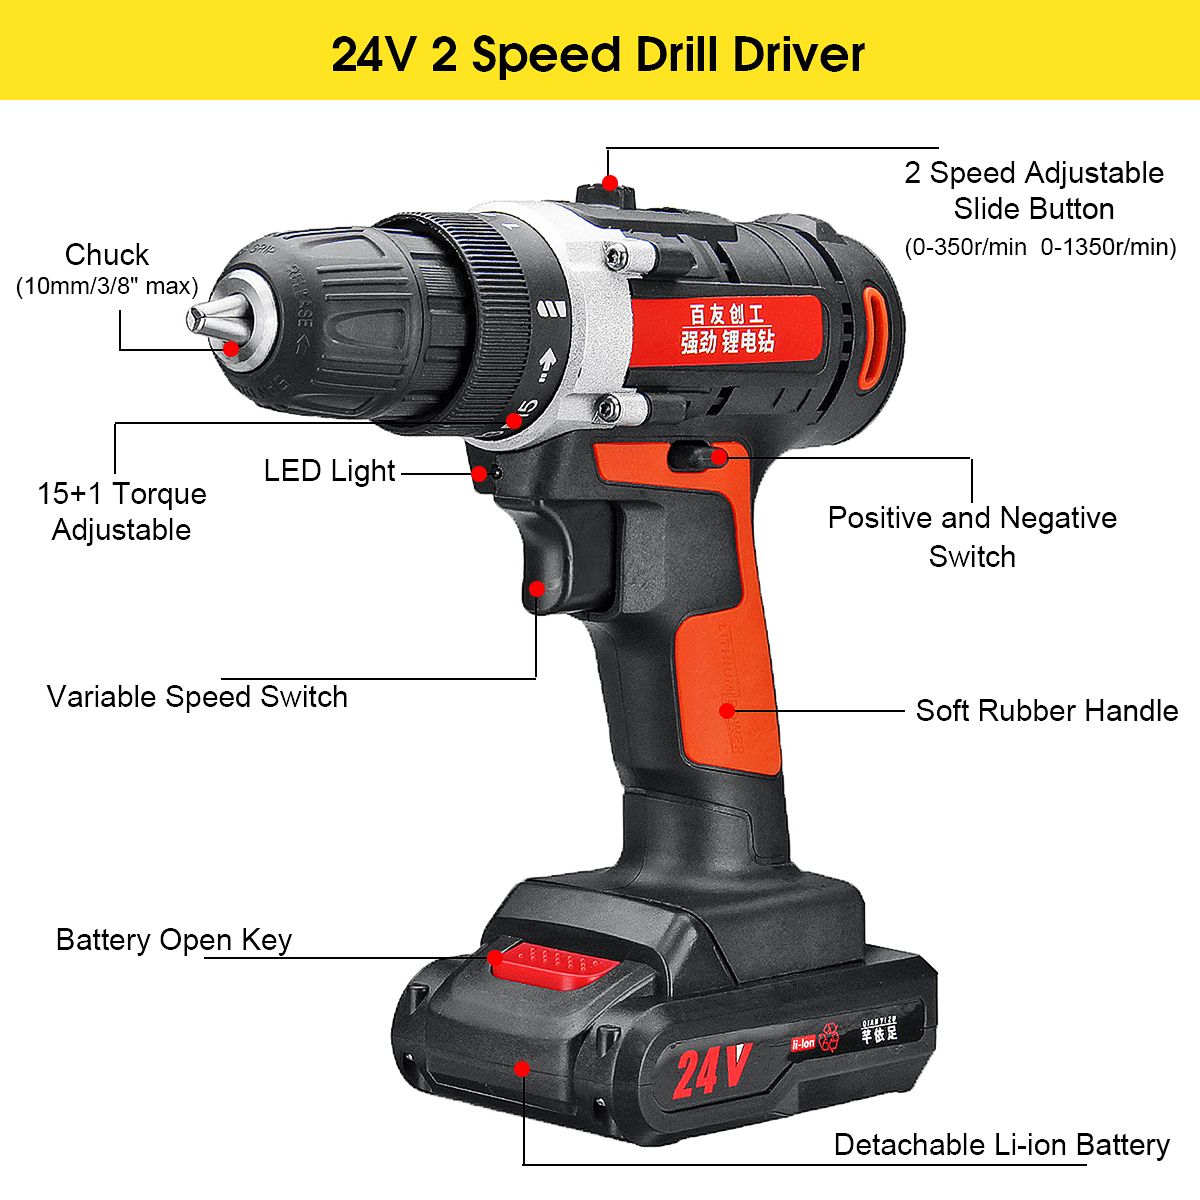 Raitool-12V24V-Lithium-Battery-Power-Drill-Cordless-Rechargeable-2-Speed-Electric-Drill-1396186